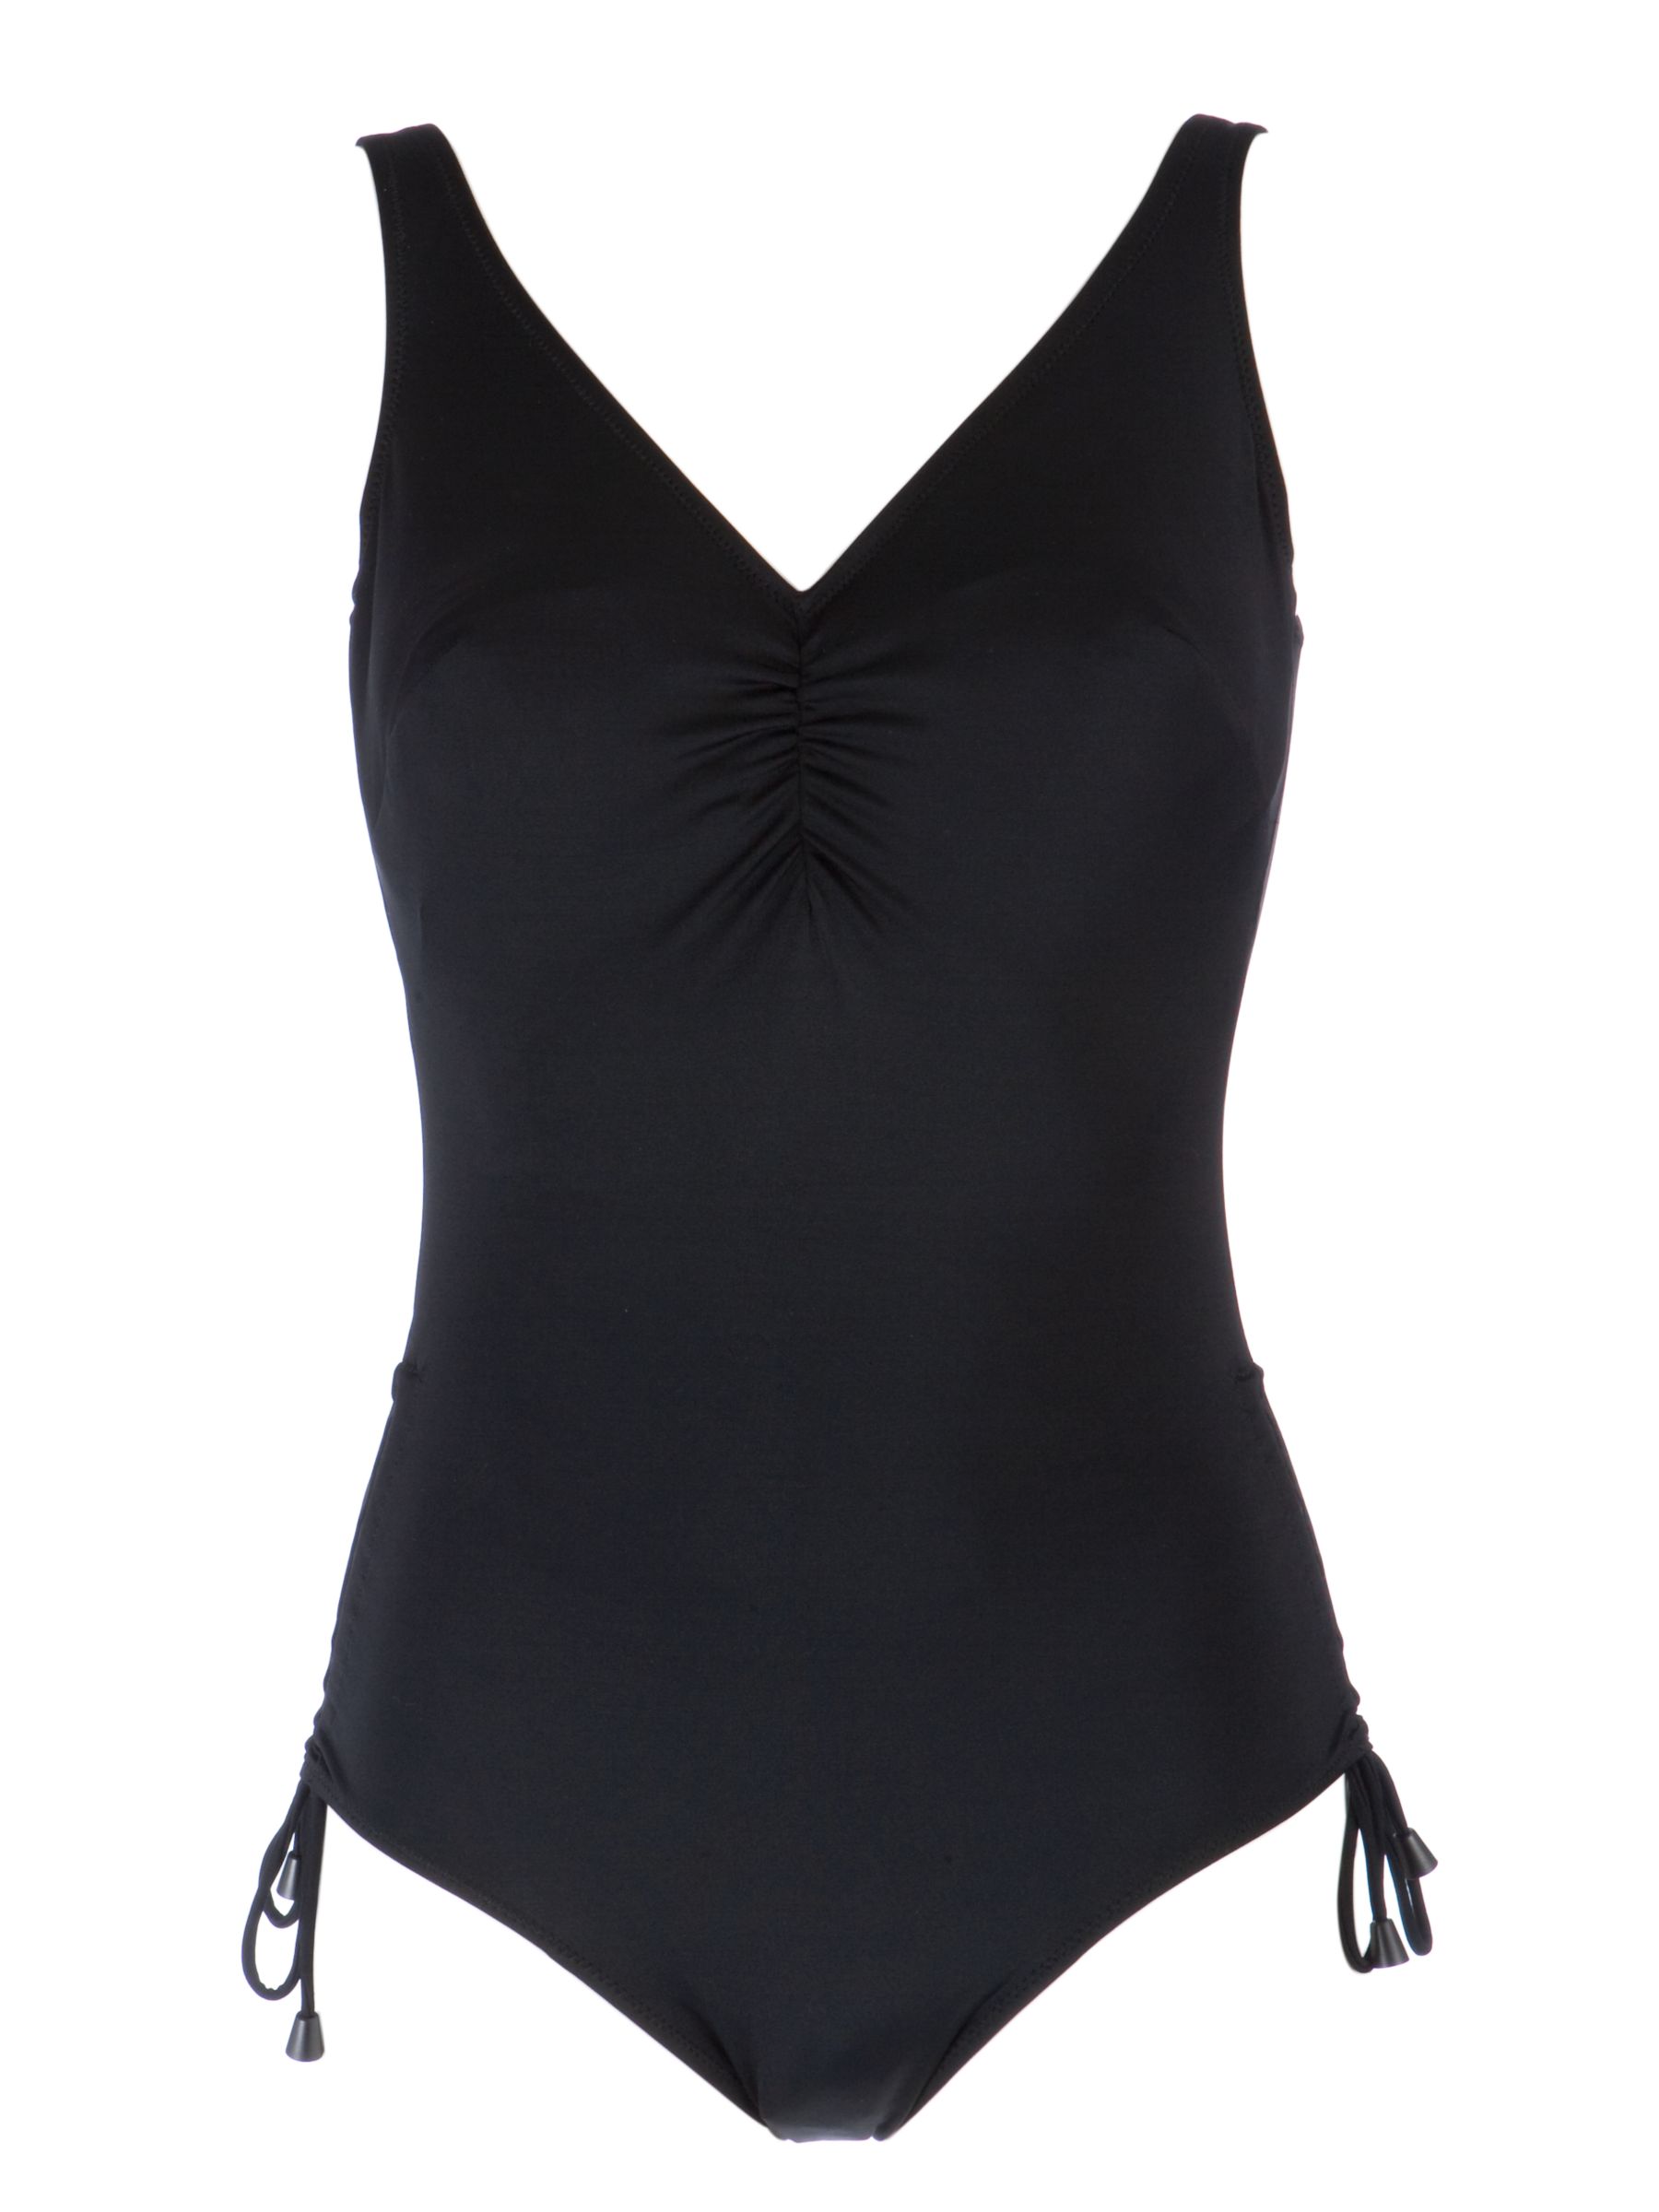 Bahamas Concealed Underwired Swimsuit,